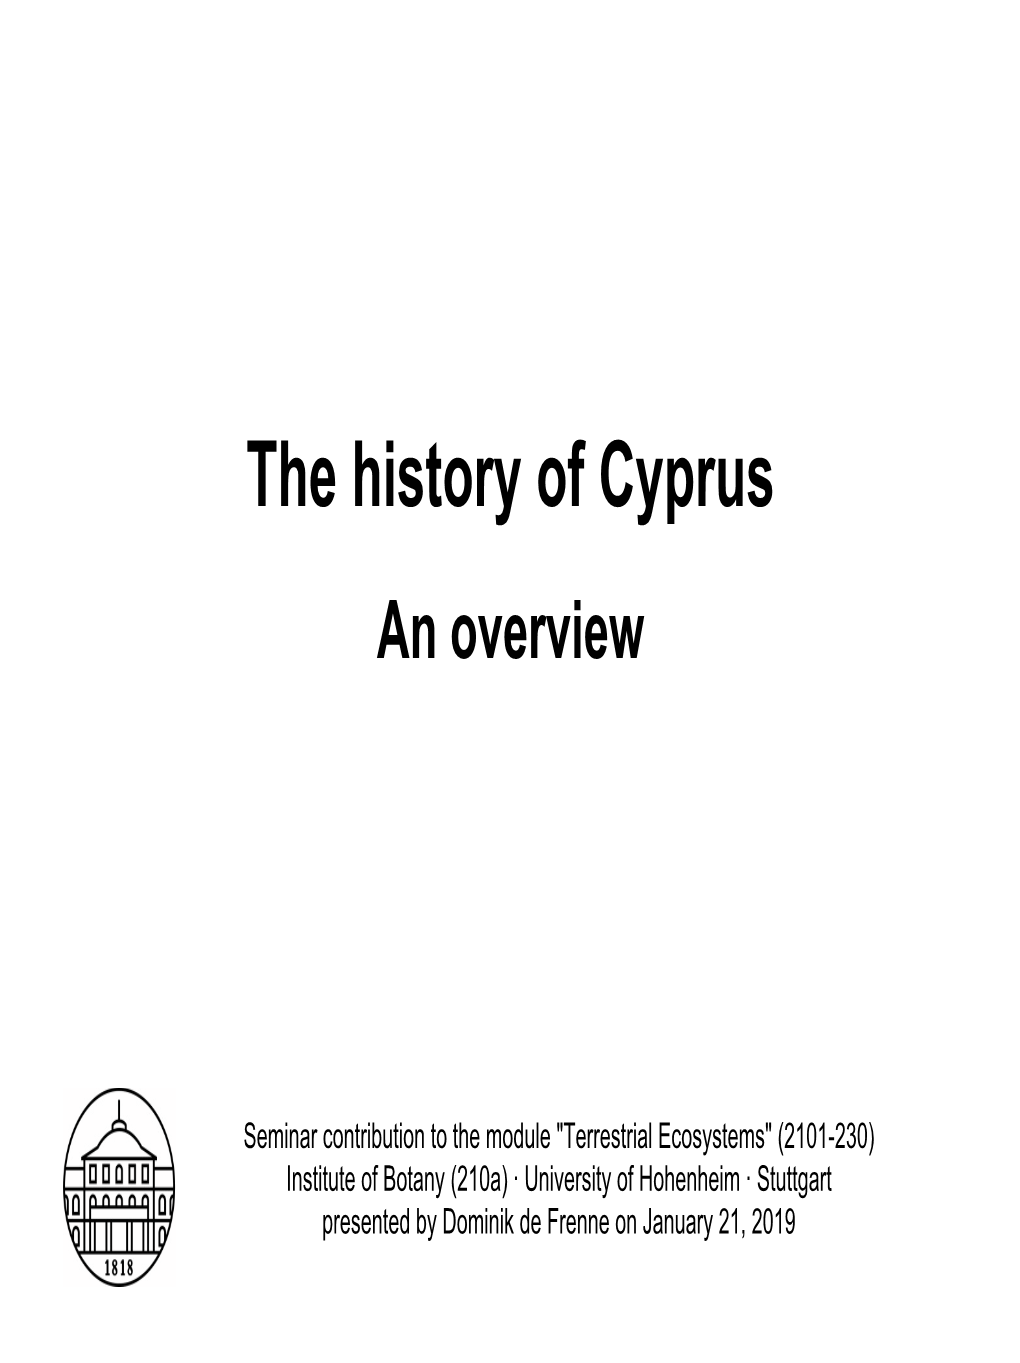 The History of Cyprus an Overview